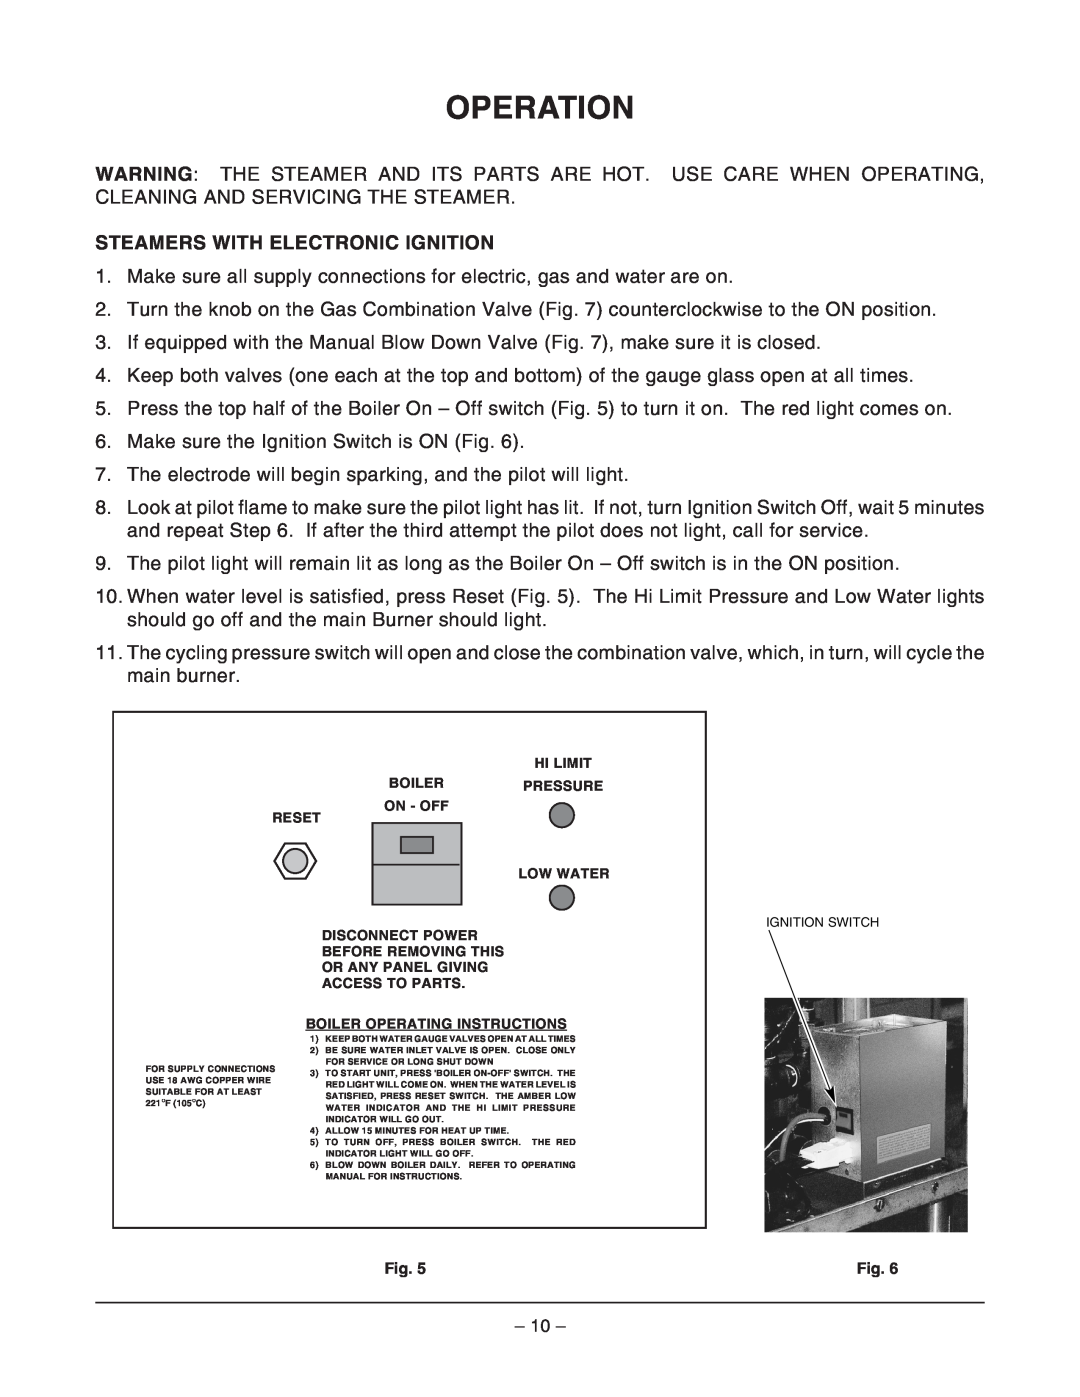 Vulcan-Hart VL3GSS ML-52393, VL2GSS ML-52389 operation manual Operation, Steamers With Electronic Ignition 